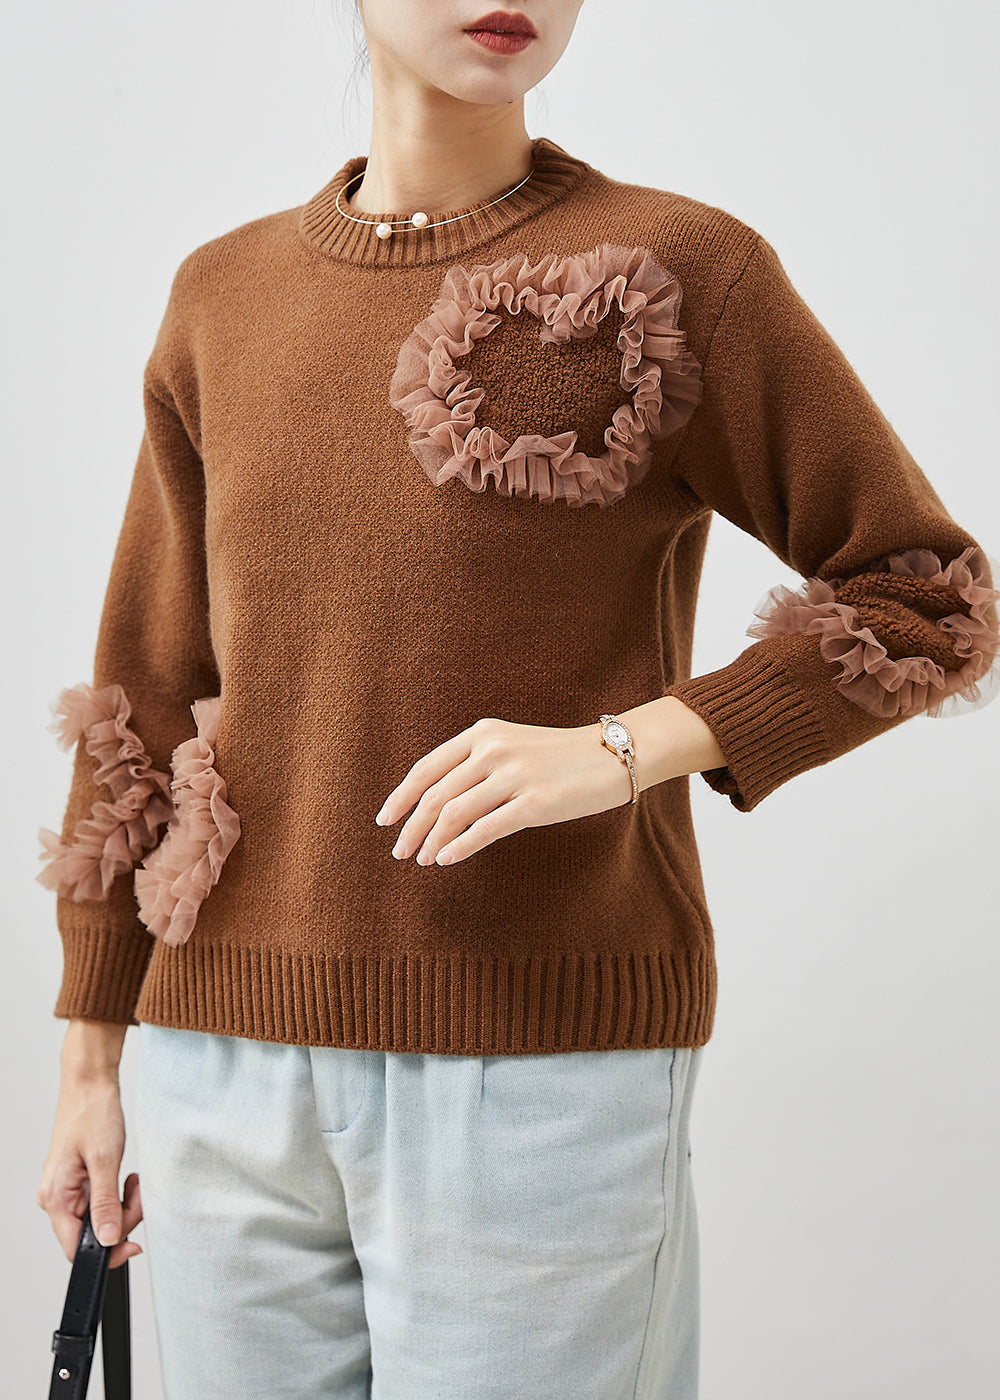 DIY Coffee Ruffled Patchwork Cozy Knit Sweater Tops Winter